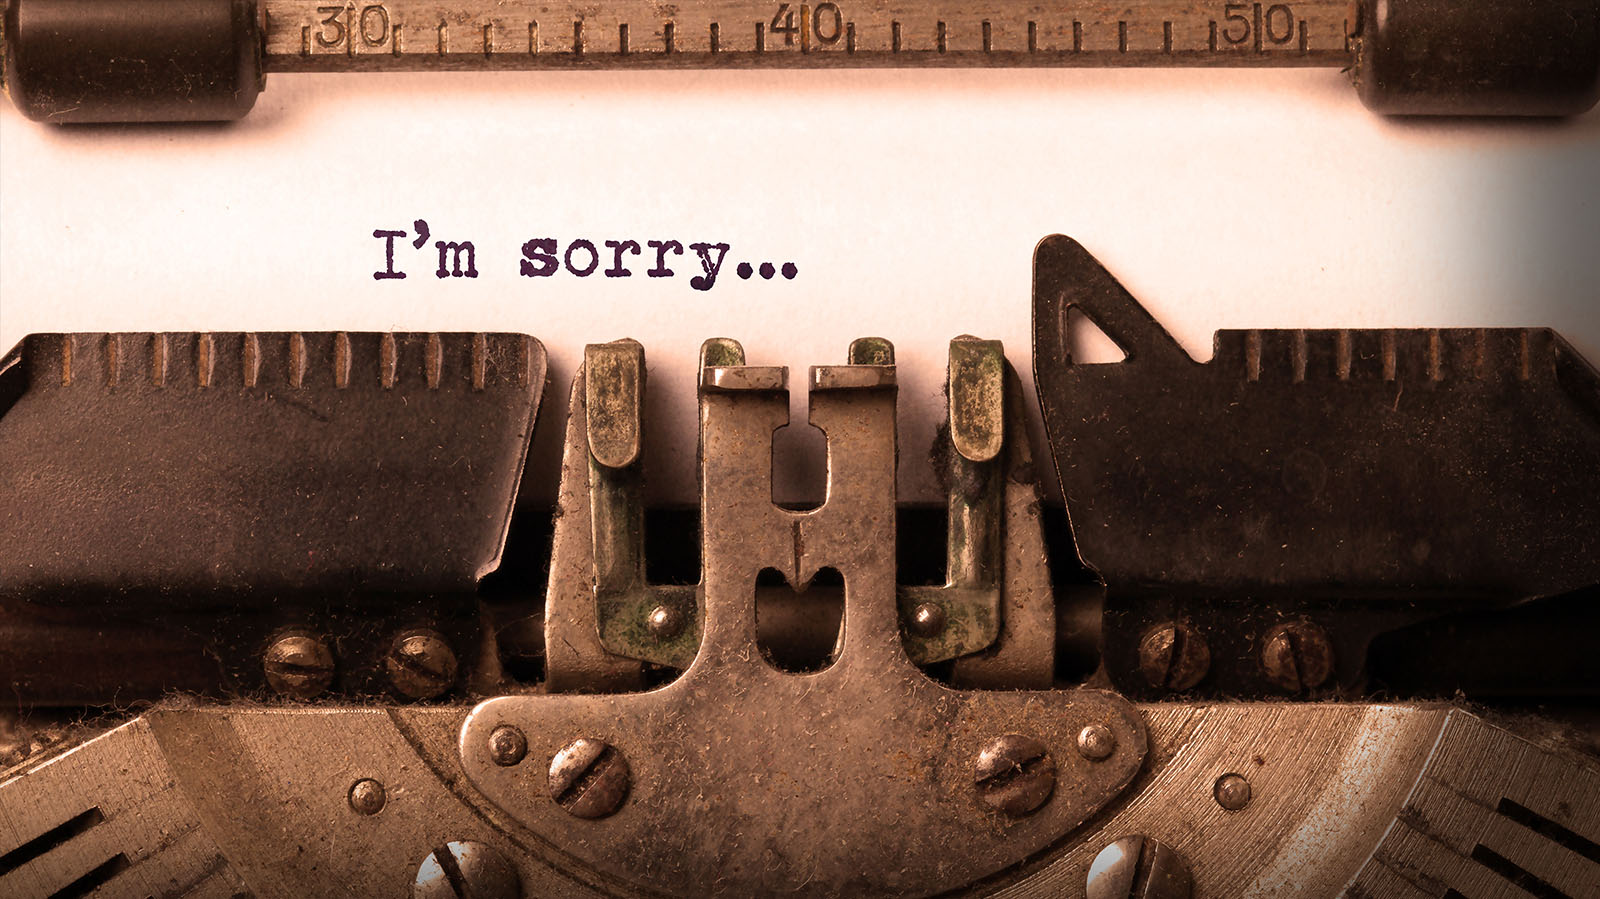 We need to learn how to say sorry